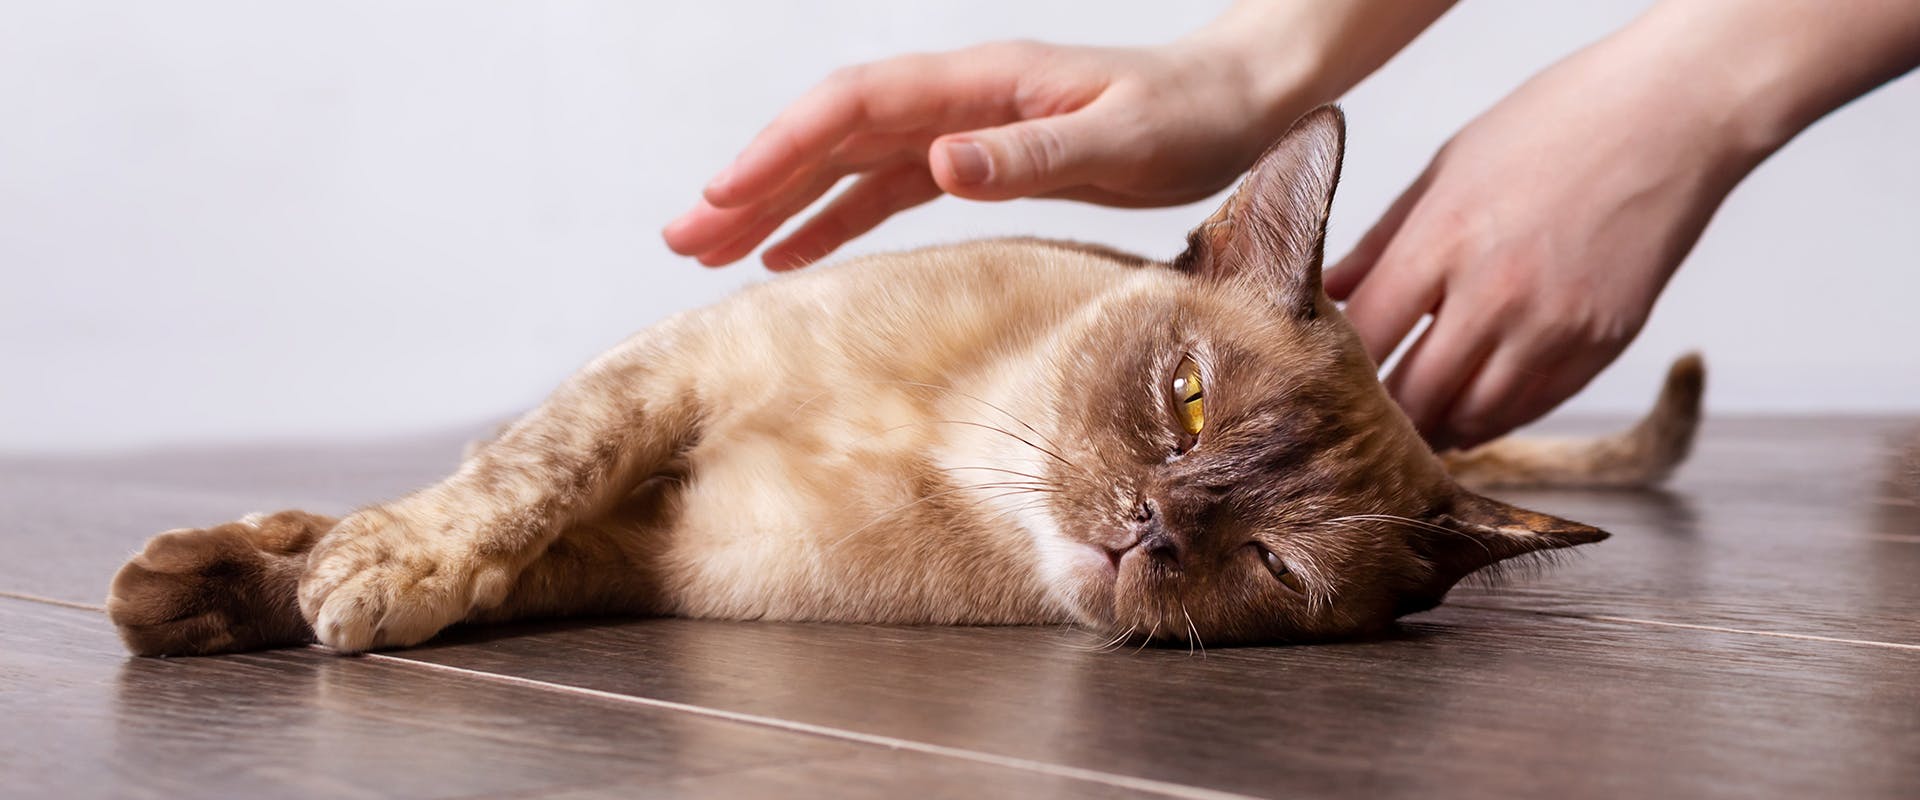 A burmese cat relaxing on the floor, a pair of hands coming down to stroke it